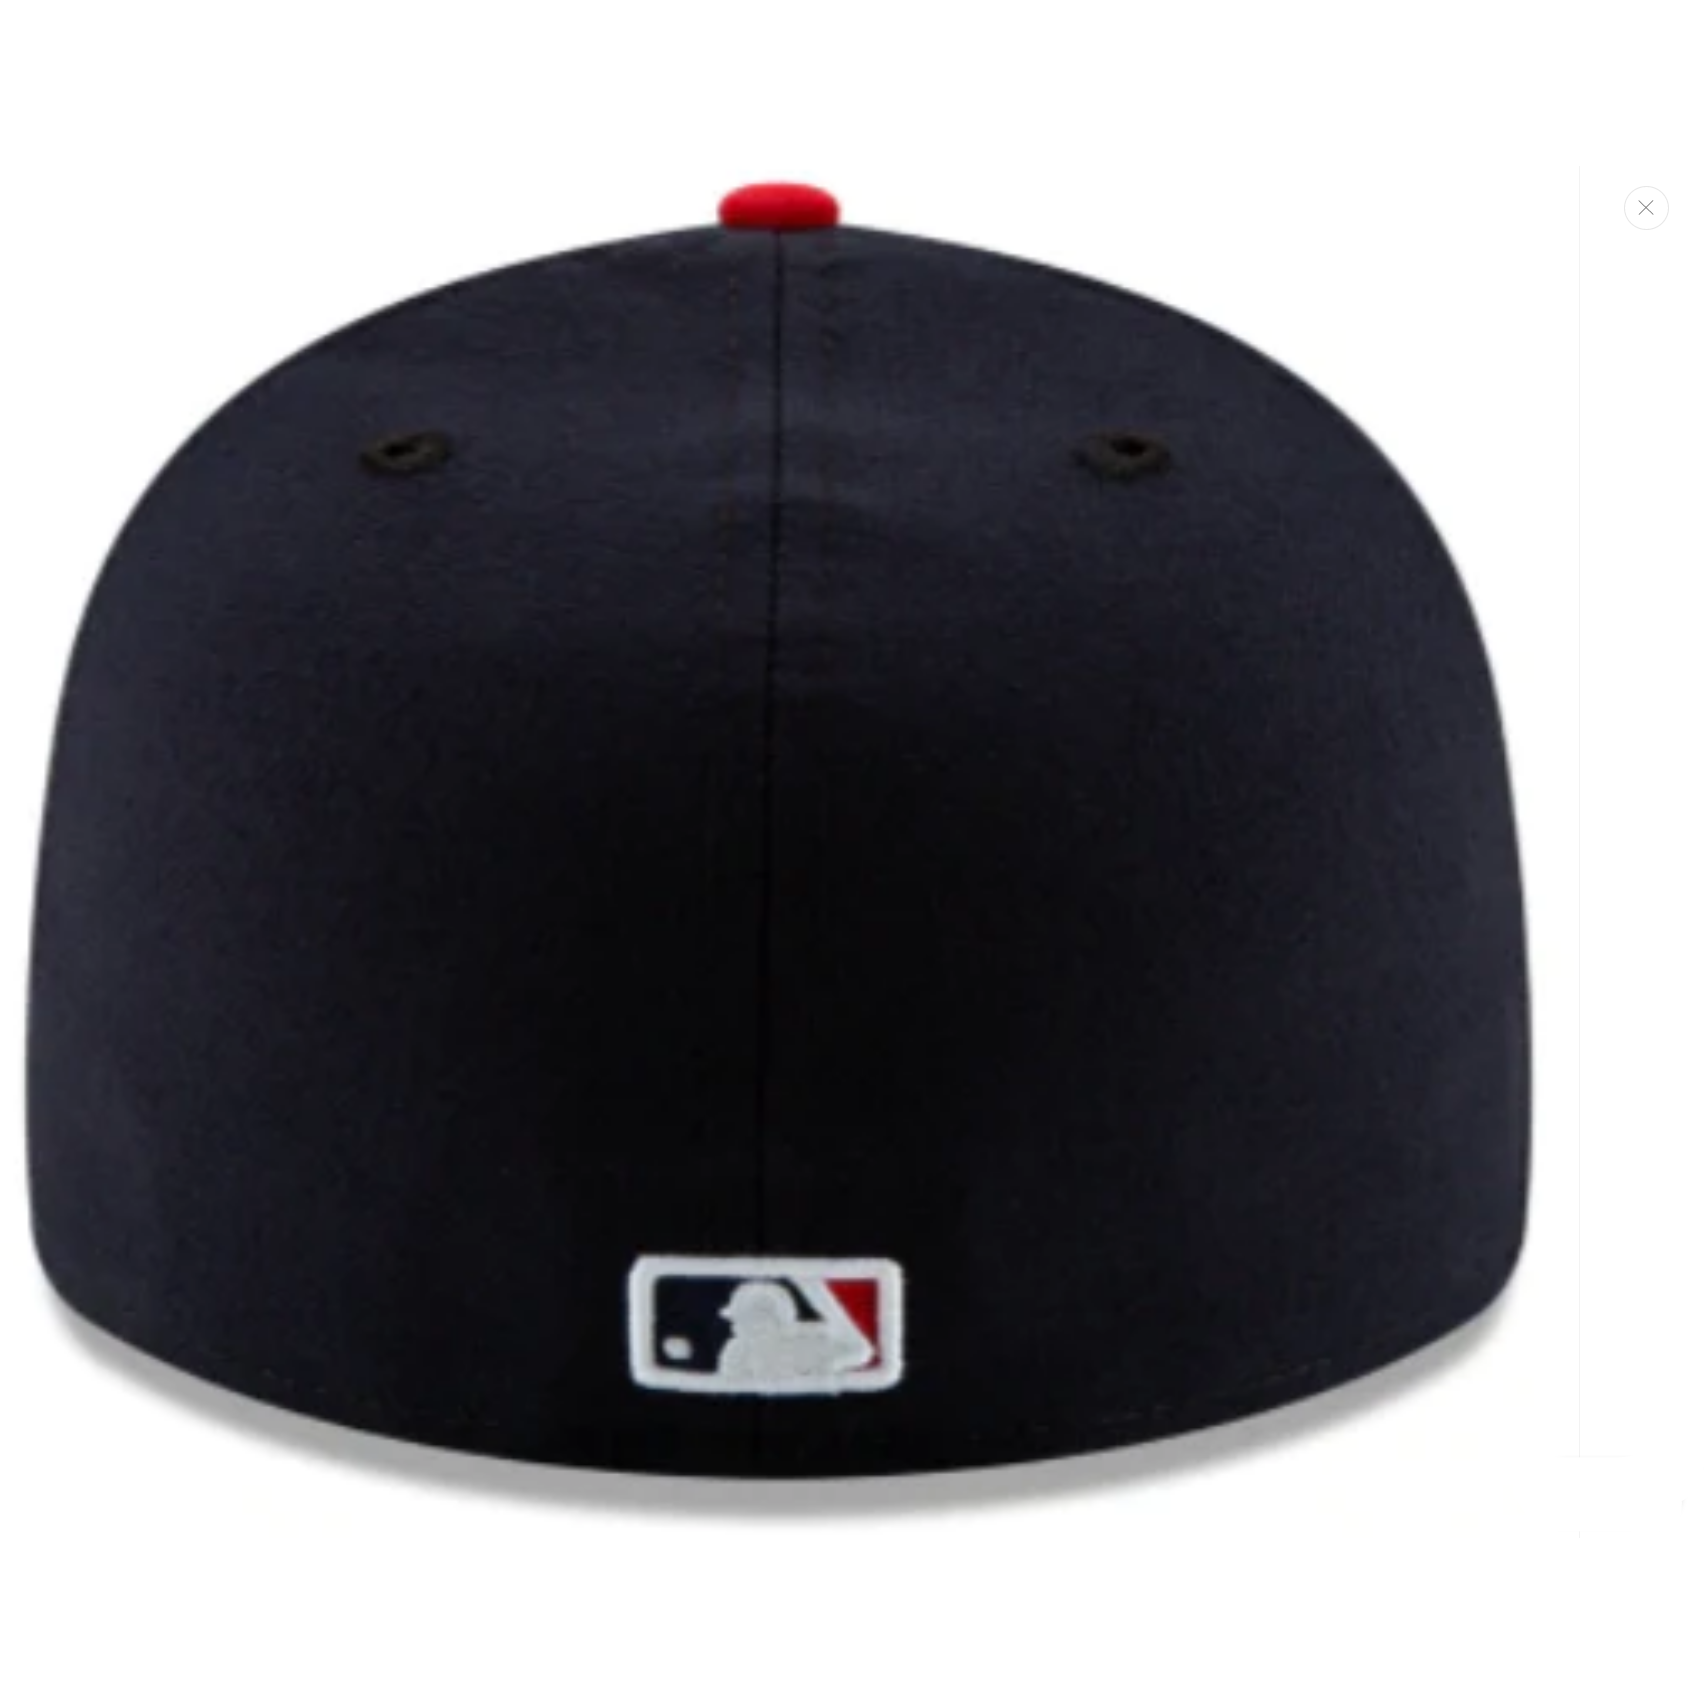 NEW ERA - CLEVELAND INDIANS AUTHENTIC COLLECTION HOME LOW PROFILE 59FIFTY FITTED